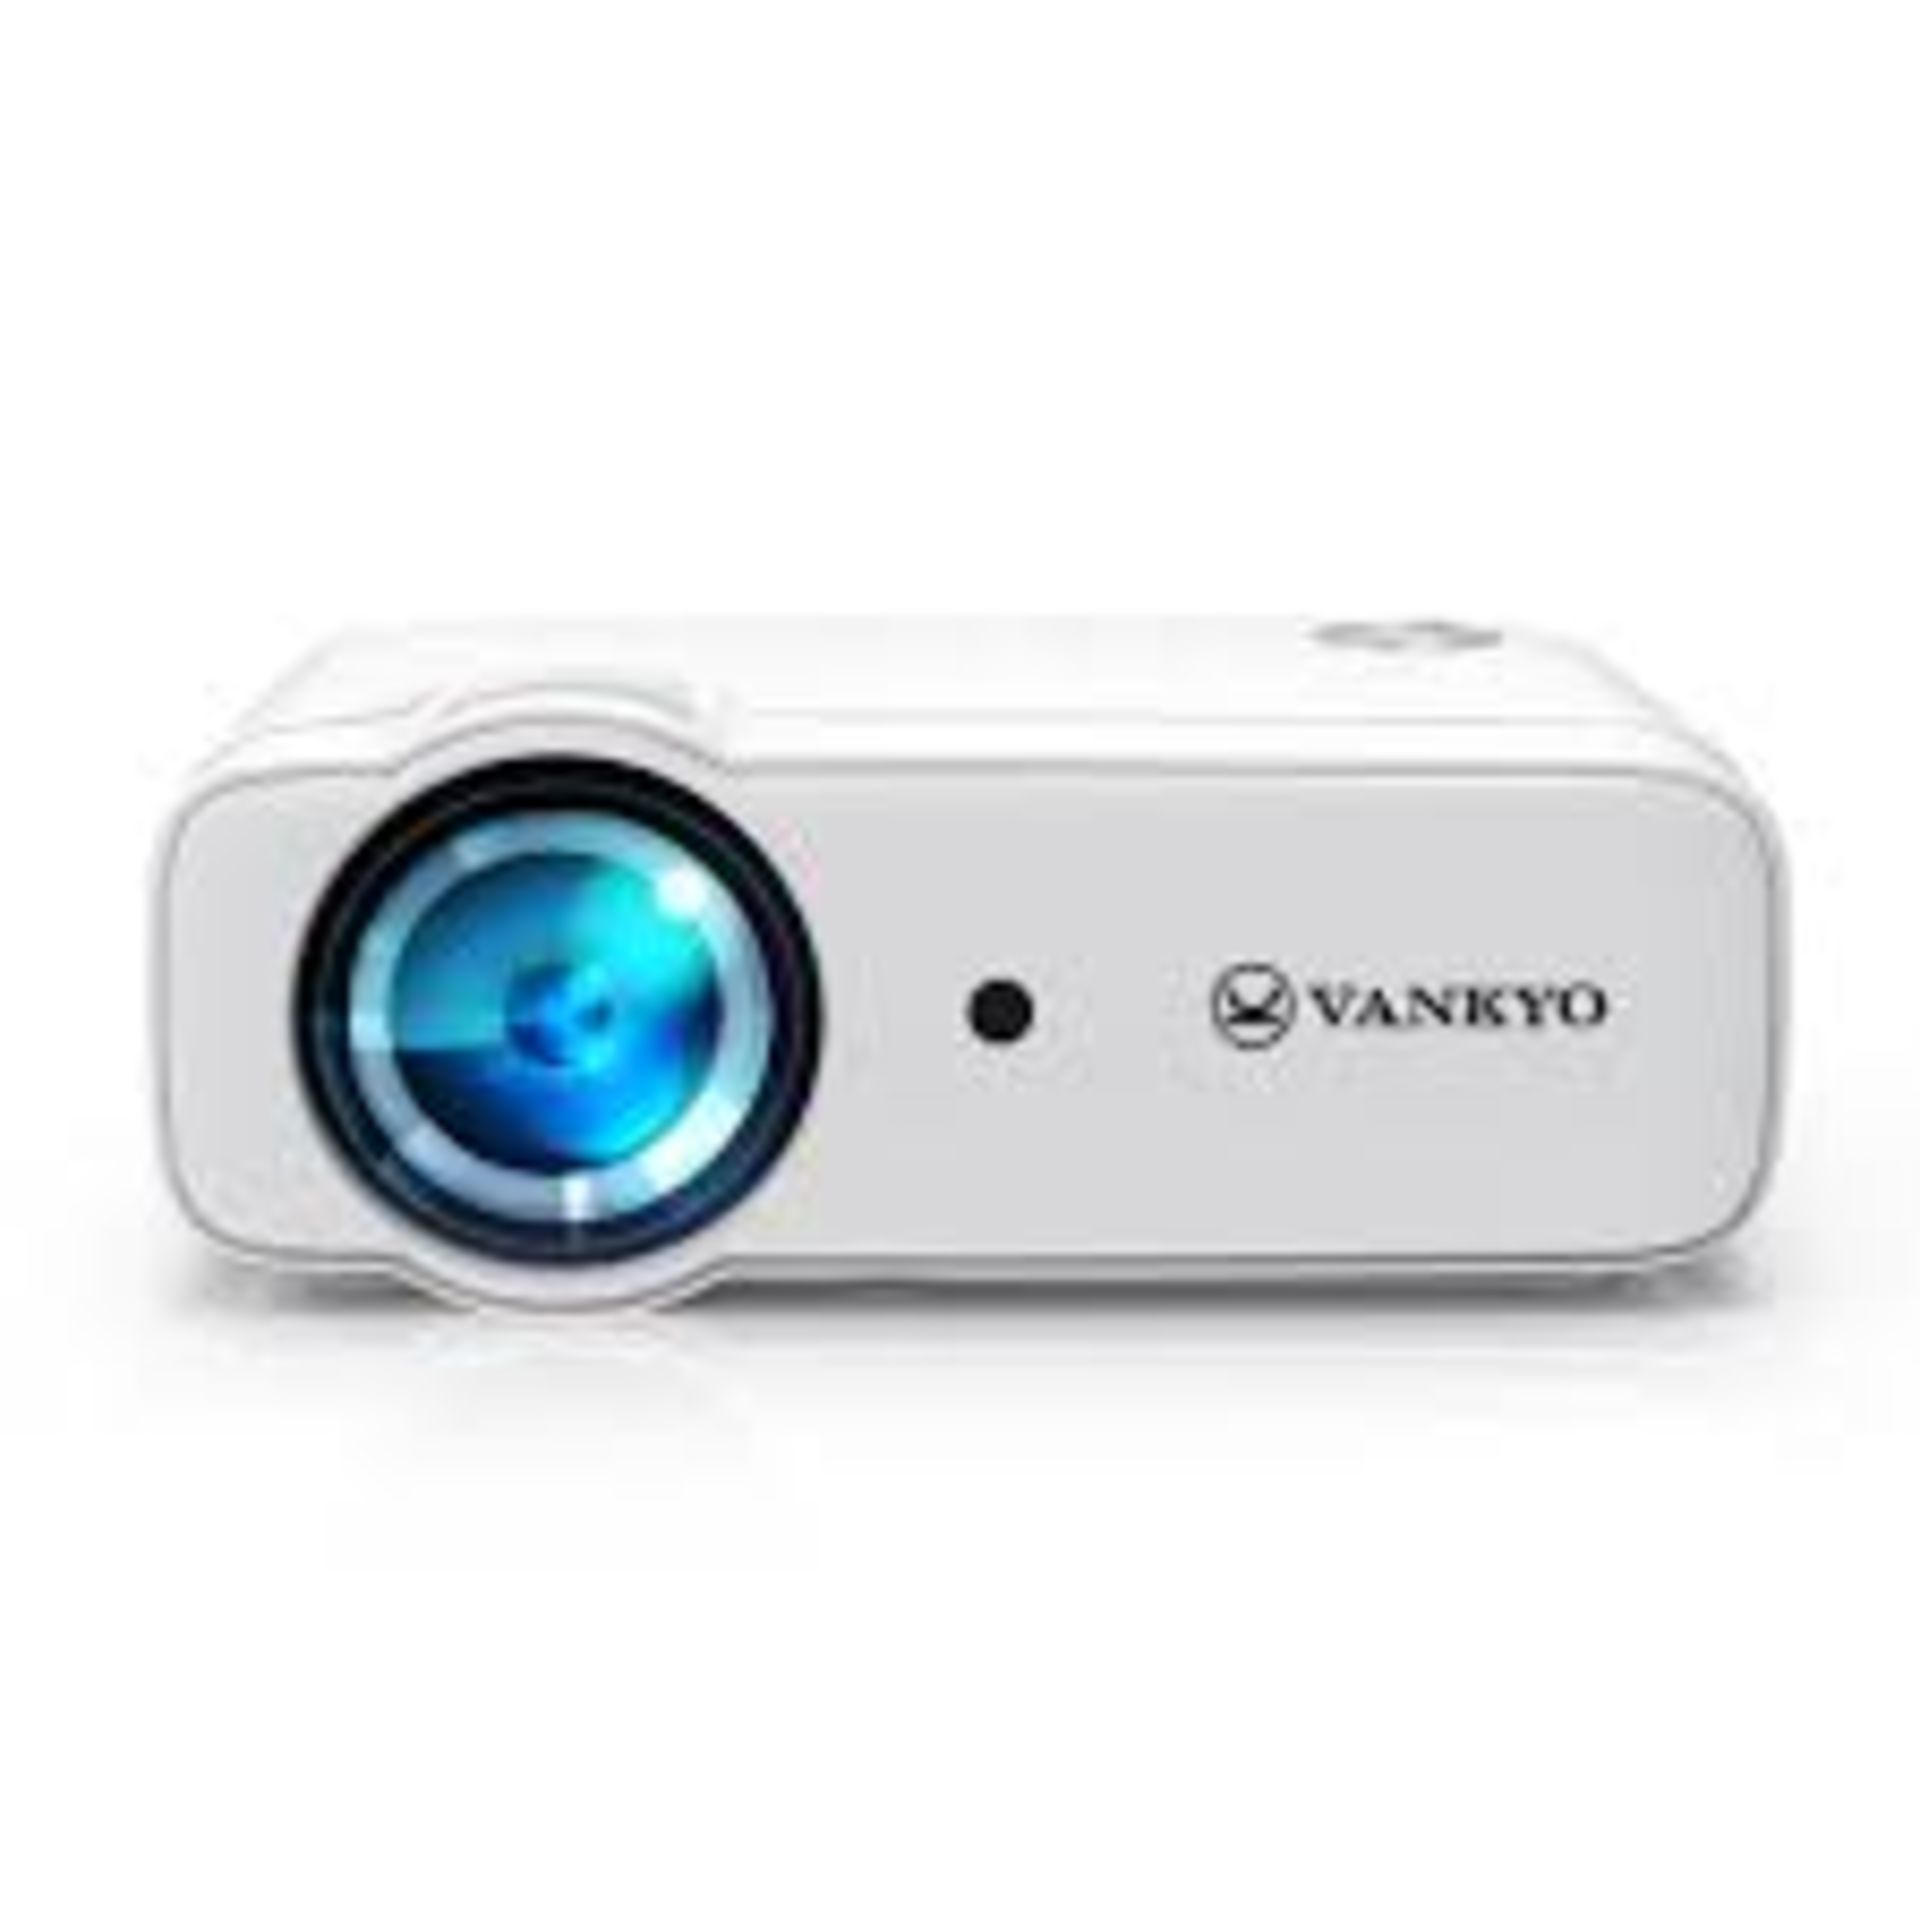 New Boxed VANKYO Leisure 430 Mini Projector for Movie, Outdoor Entertainment, Native 720P. 236”